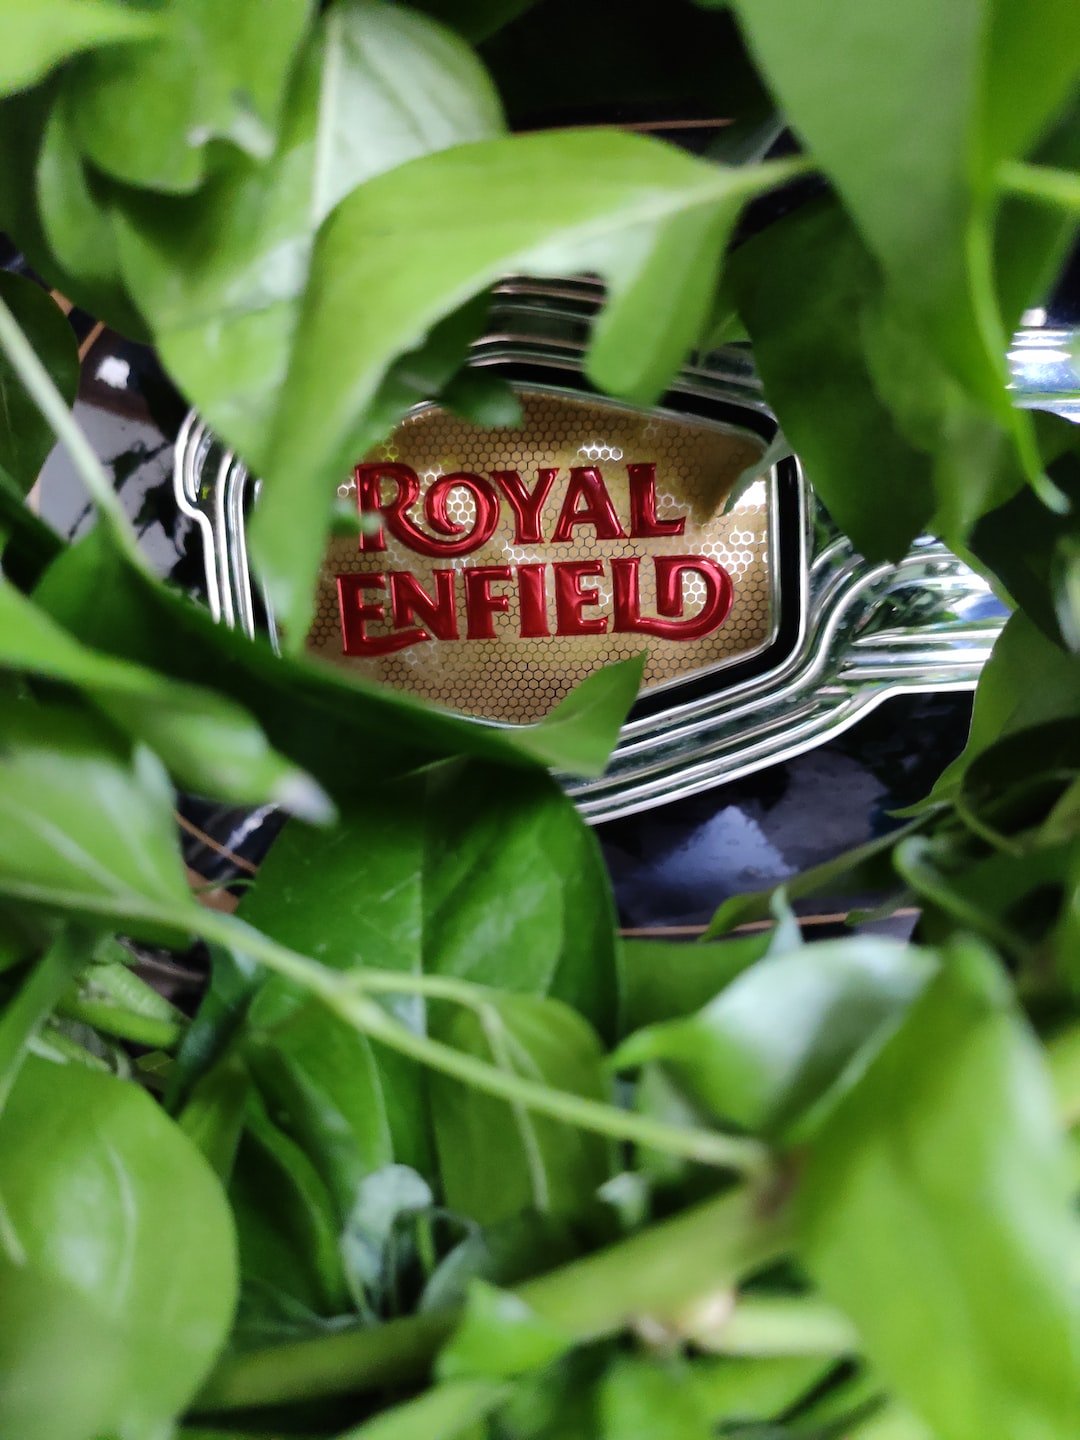 a royal enfield logo is seen through the leaves of a plant